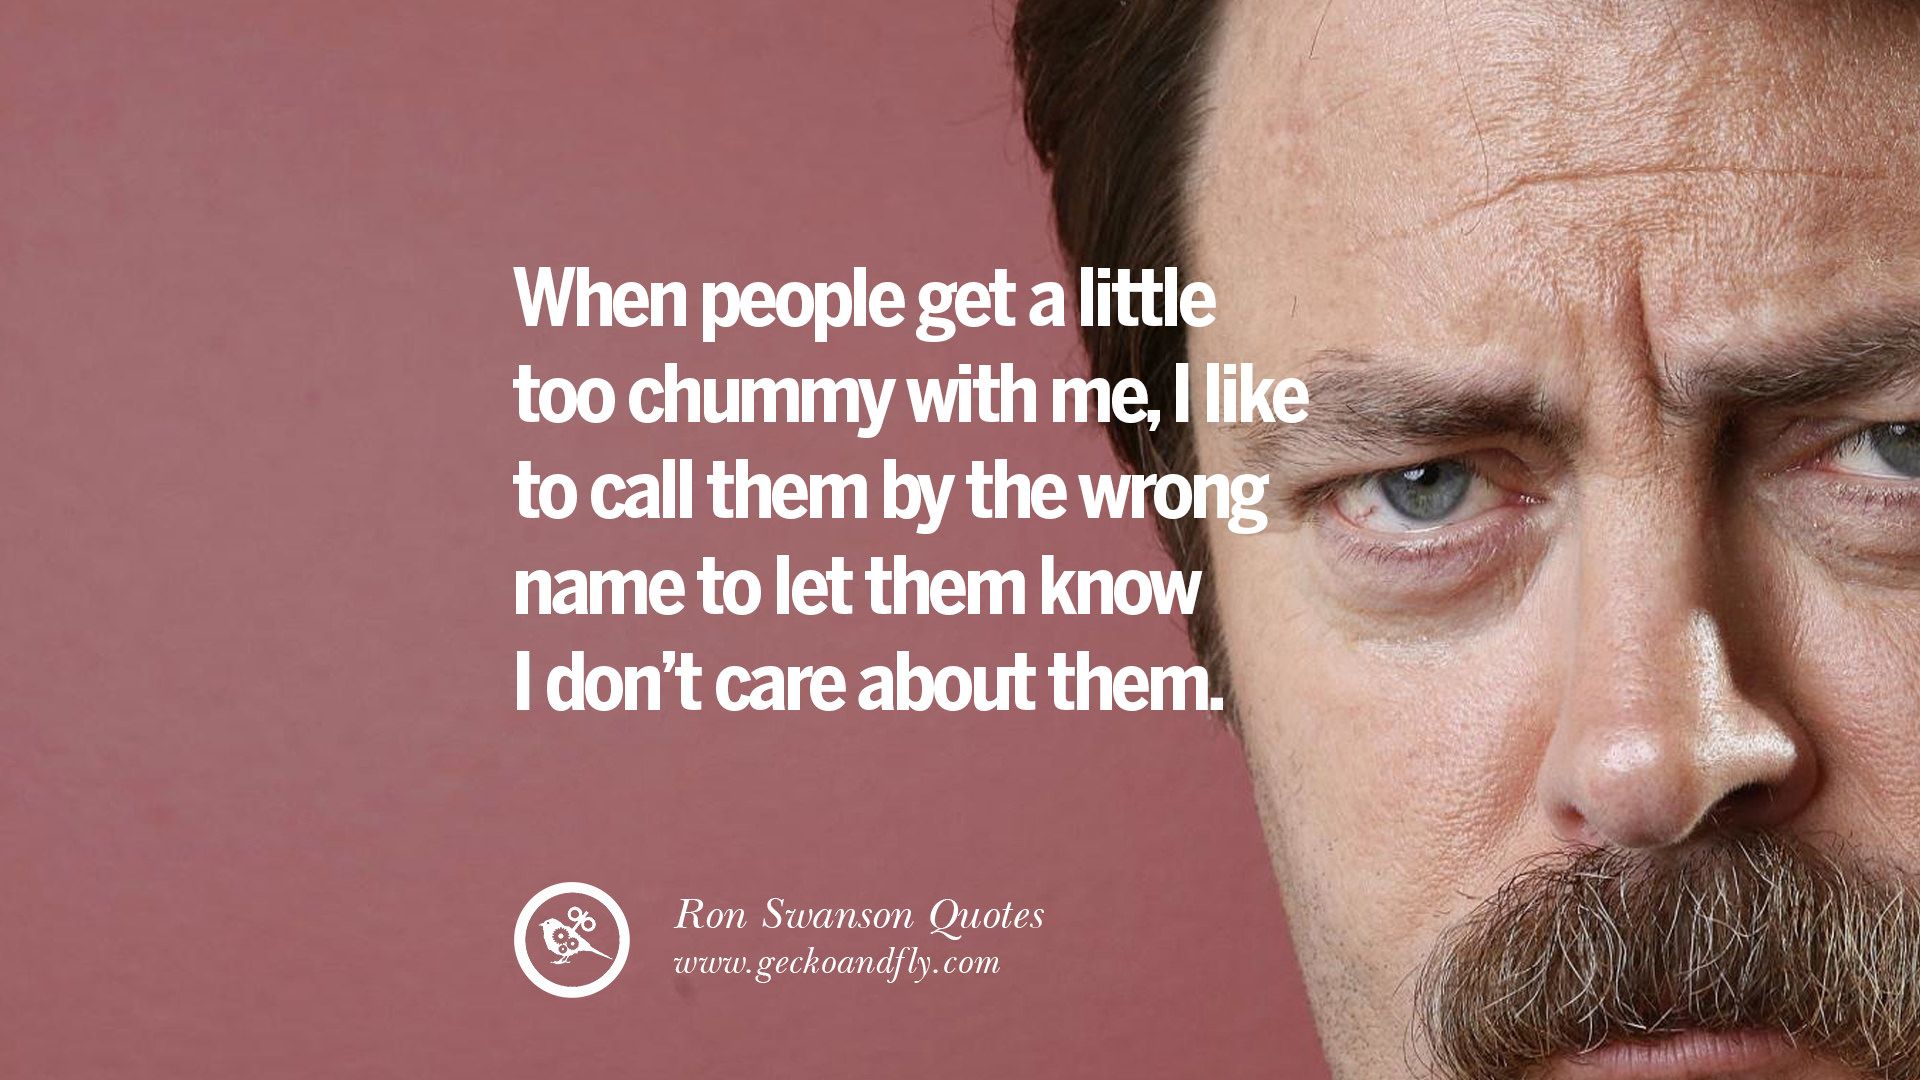 Funny Ron Swanson Quotes And Meme On Life